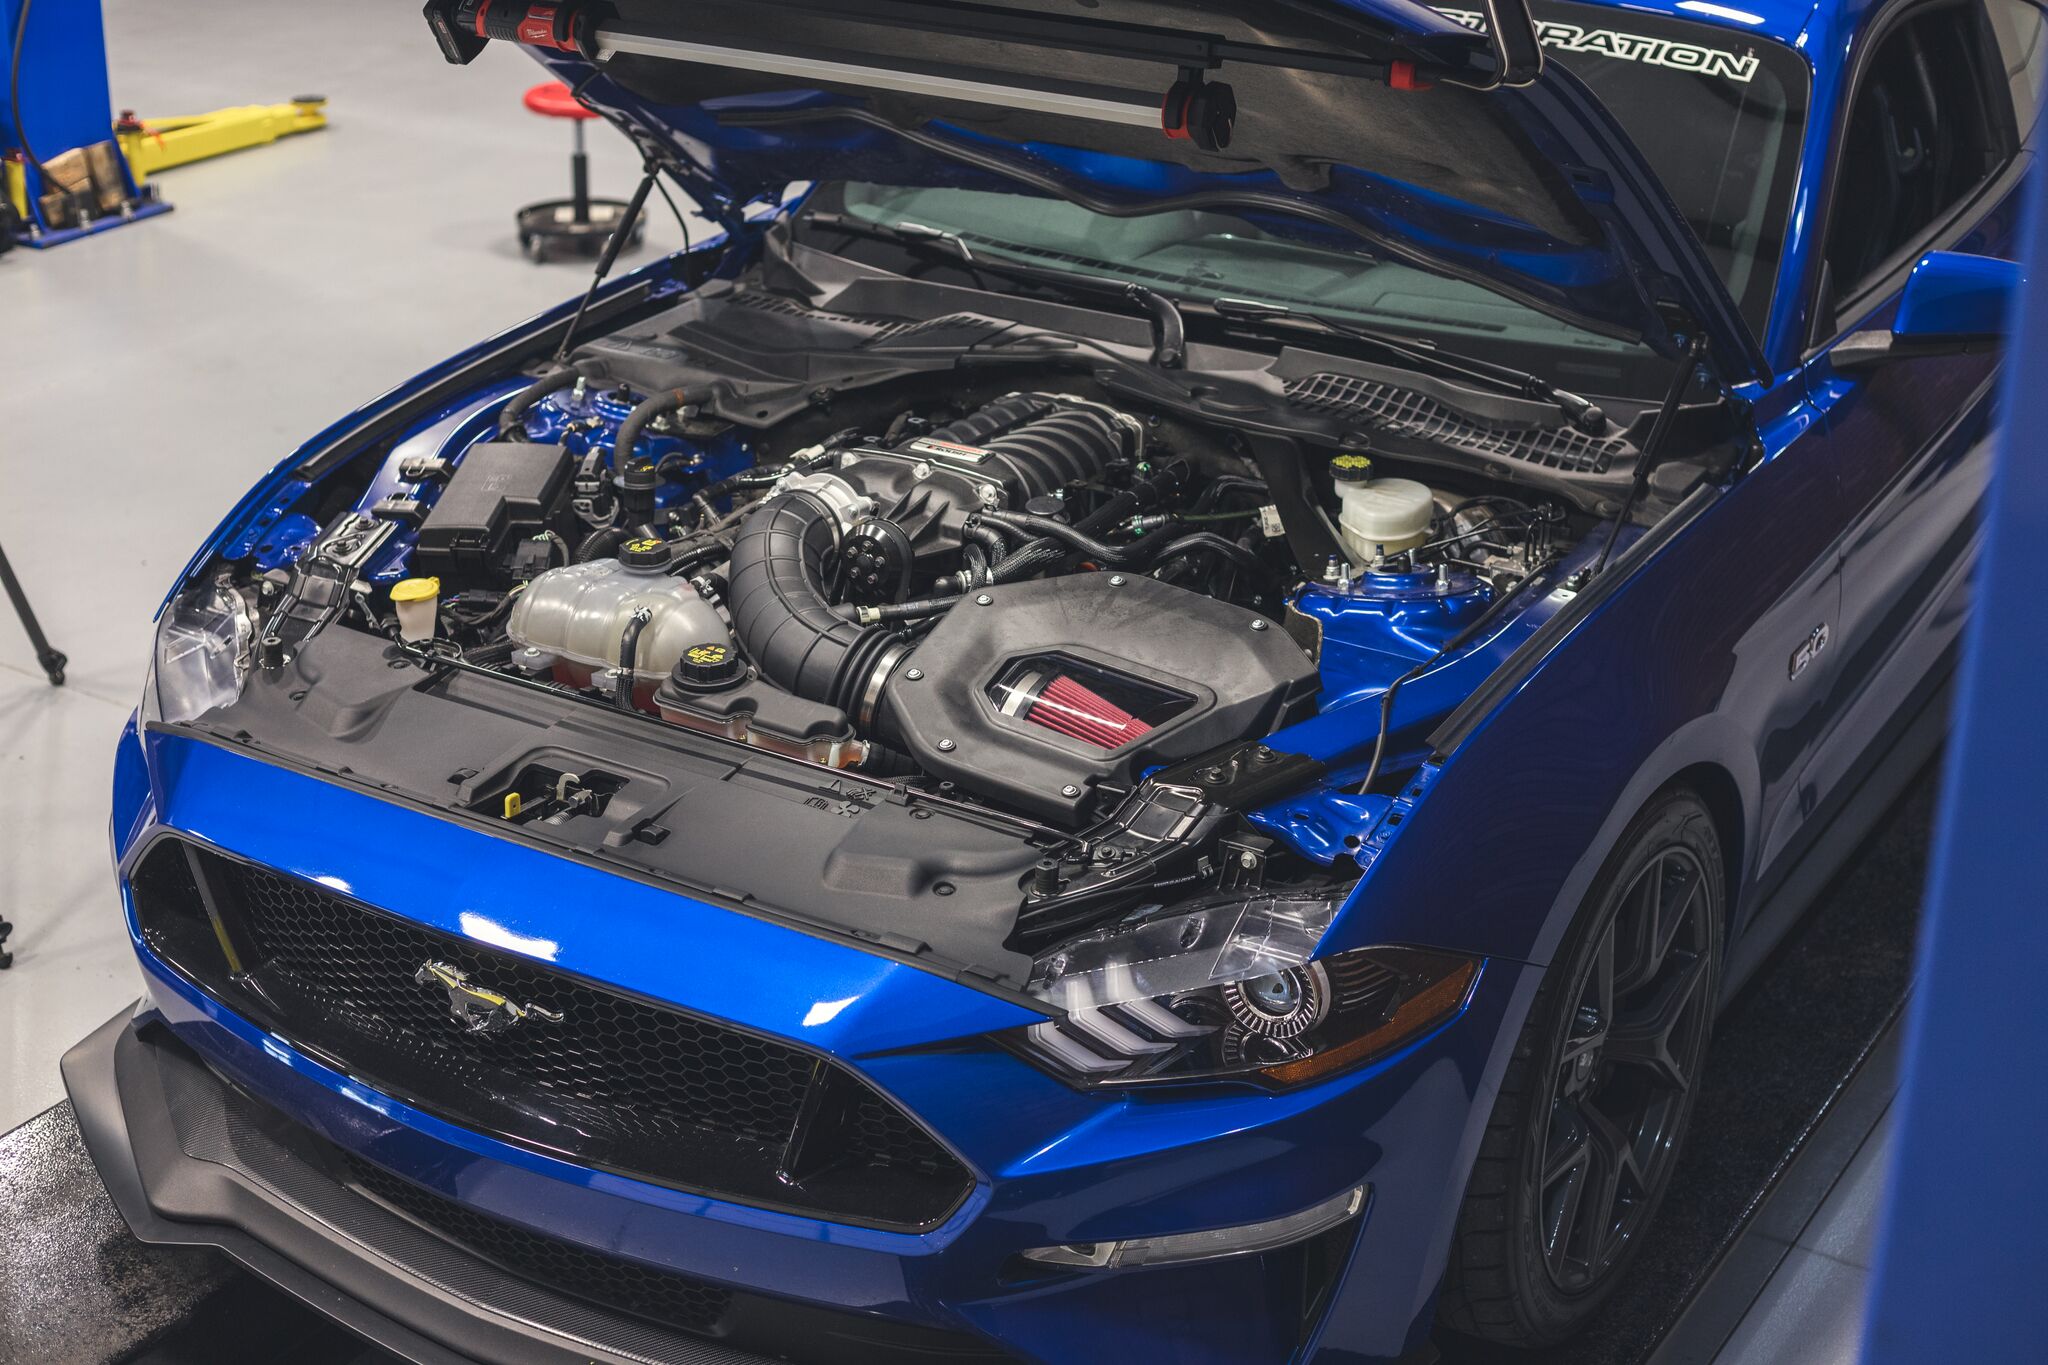 How Much Power Will A Roush Phase 1 Supercharger Make On A 2018 Mustang GT? - How Much Power Will A Roush Phase 1 Supercharger Make On A 2018 Mustang GT?